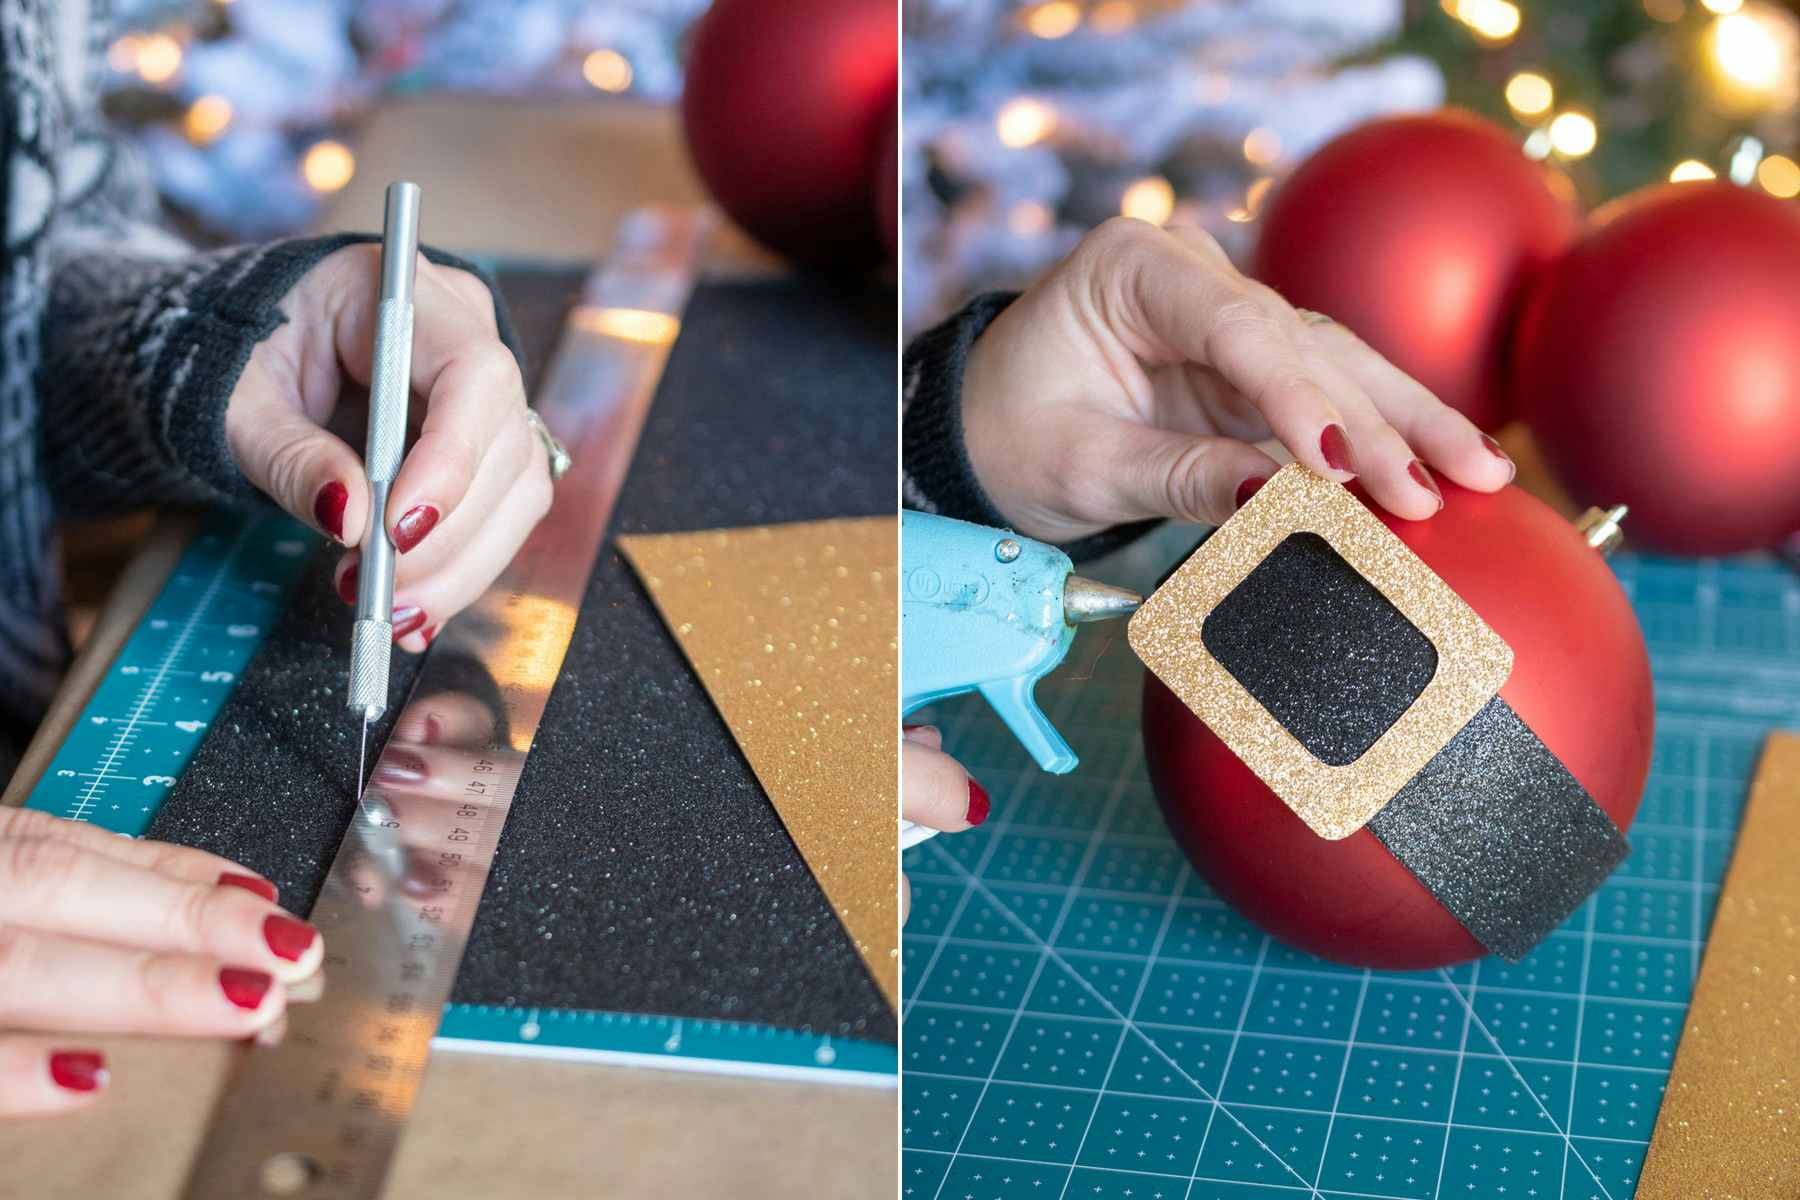 someone cutting out a black ribbon and gluing it on a red ornament to make a belt